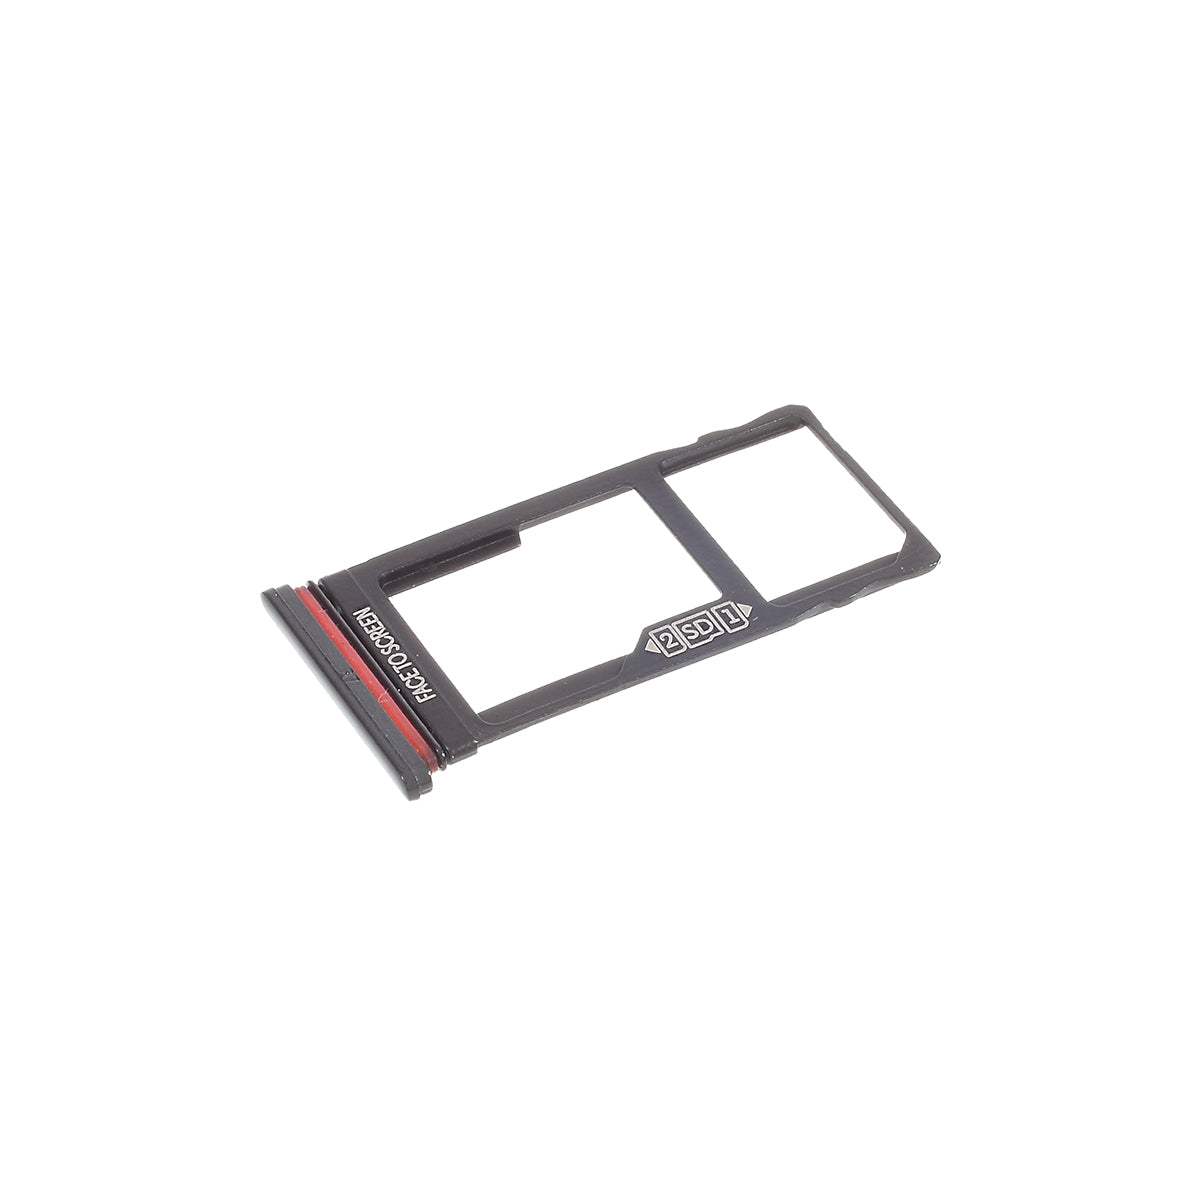 OEM Micro SD Card Tray Holder Replacement for Motorola One Vision P50 - Red / Black